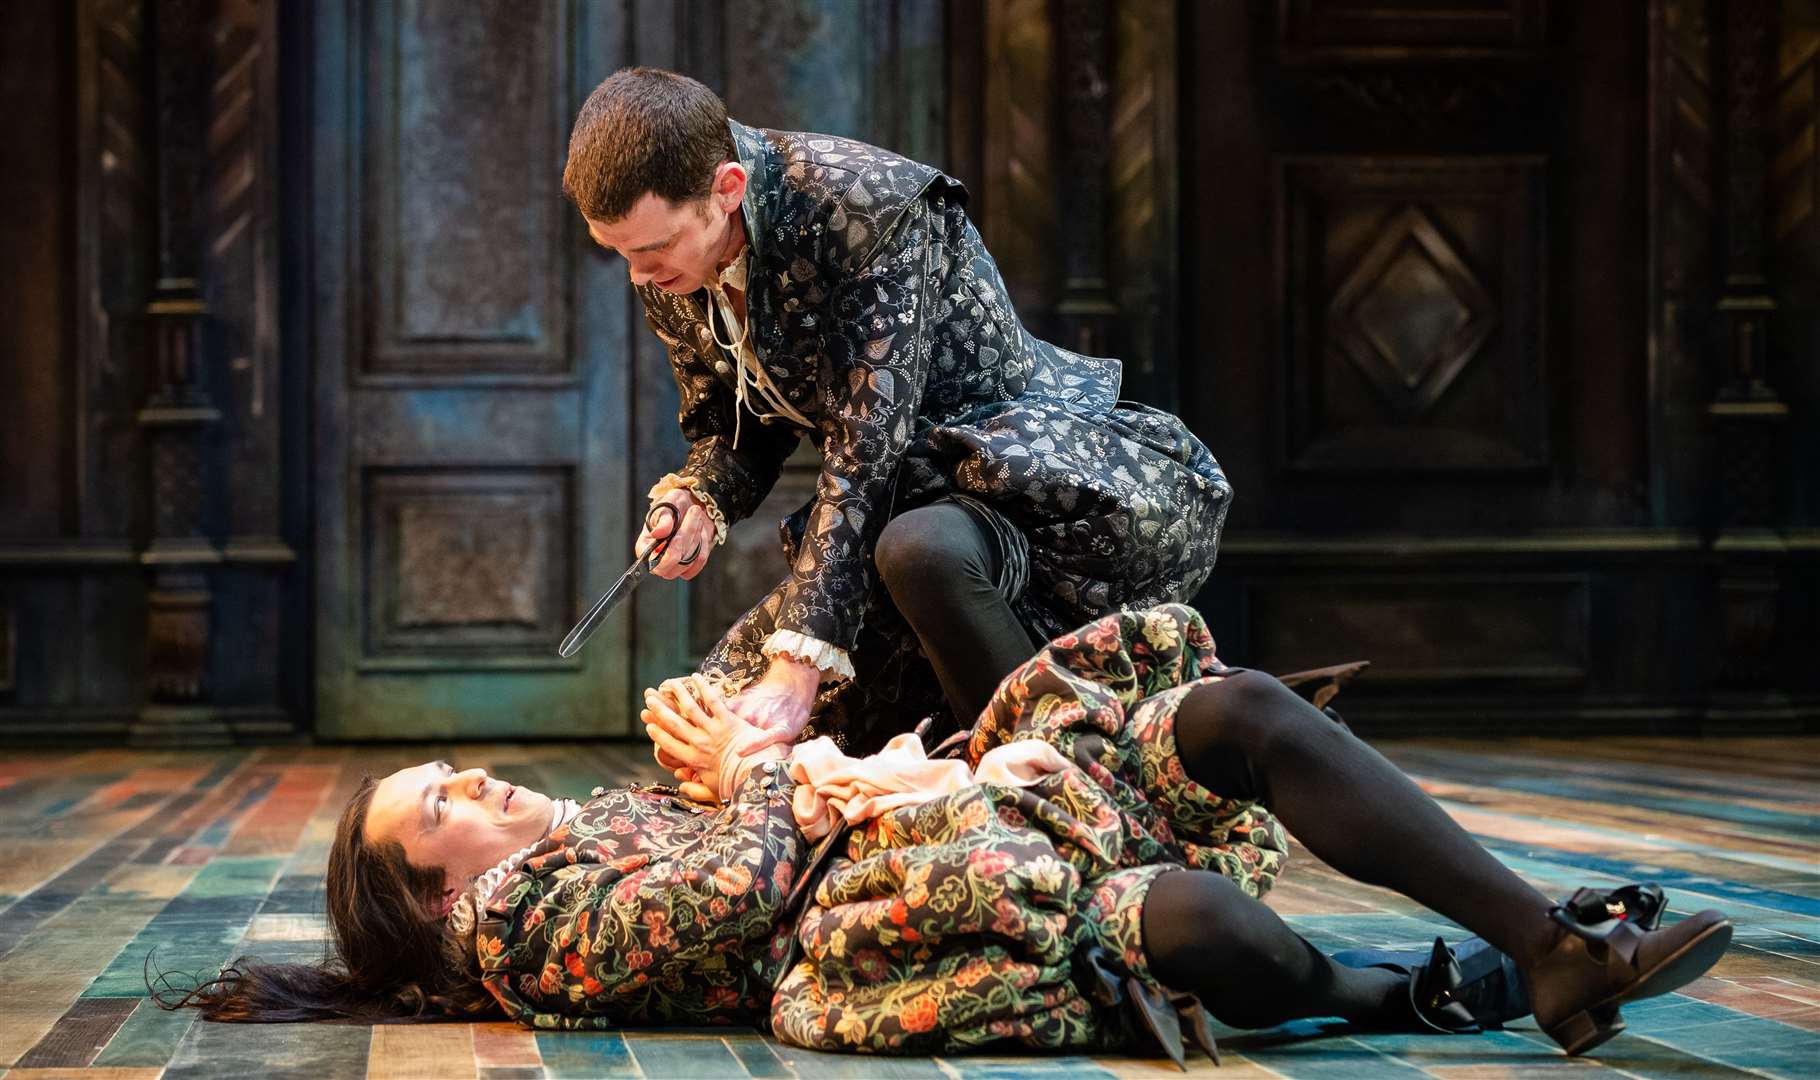 The Taming of the Shrew by the RSC Picture: Ikin Yum Photography